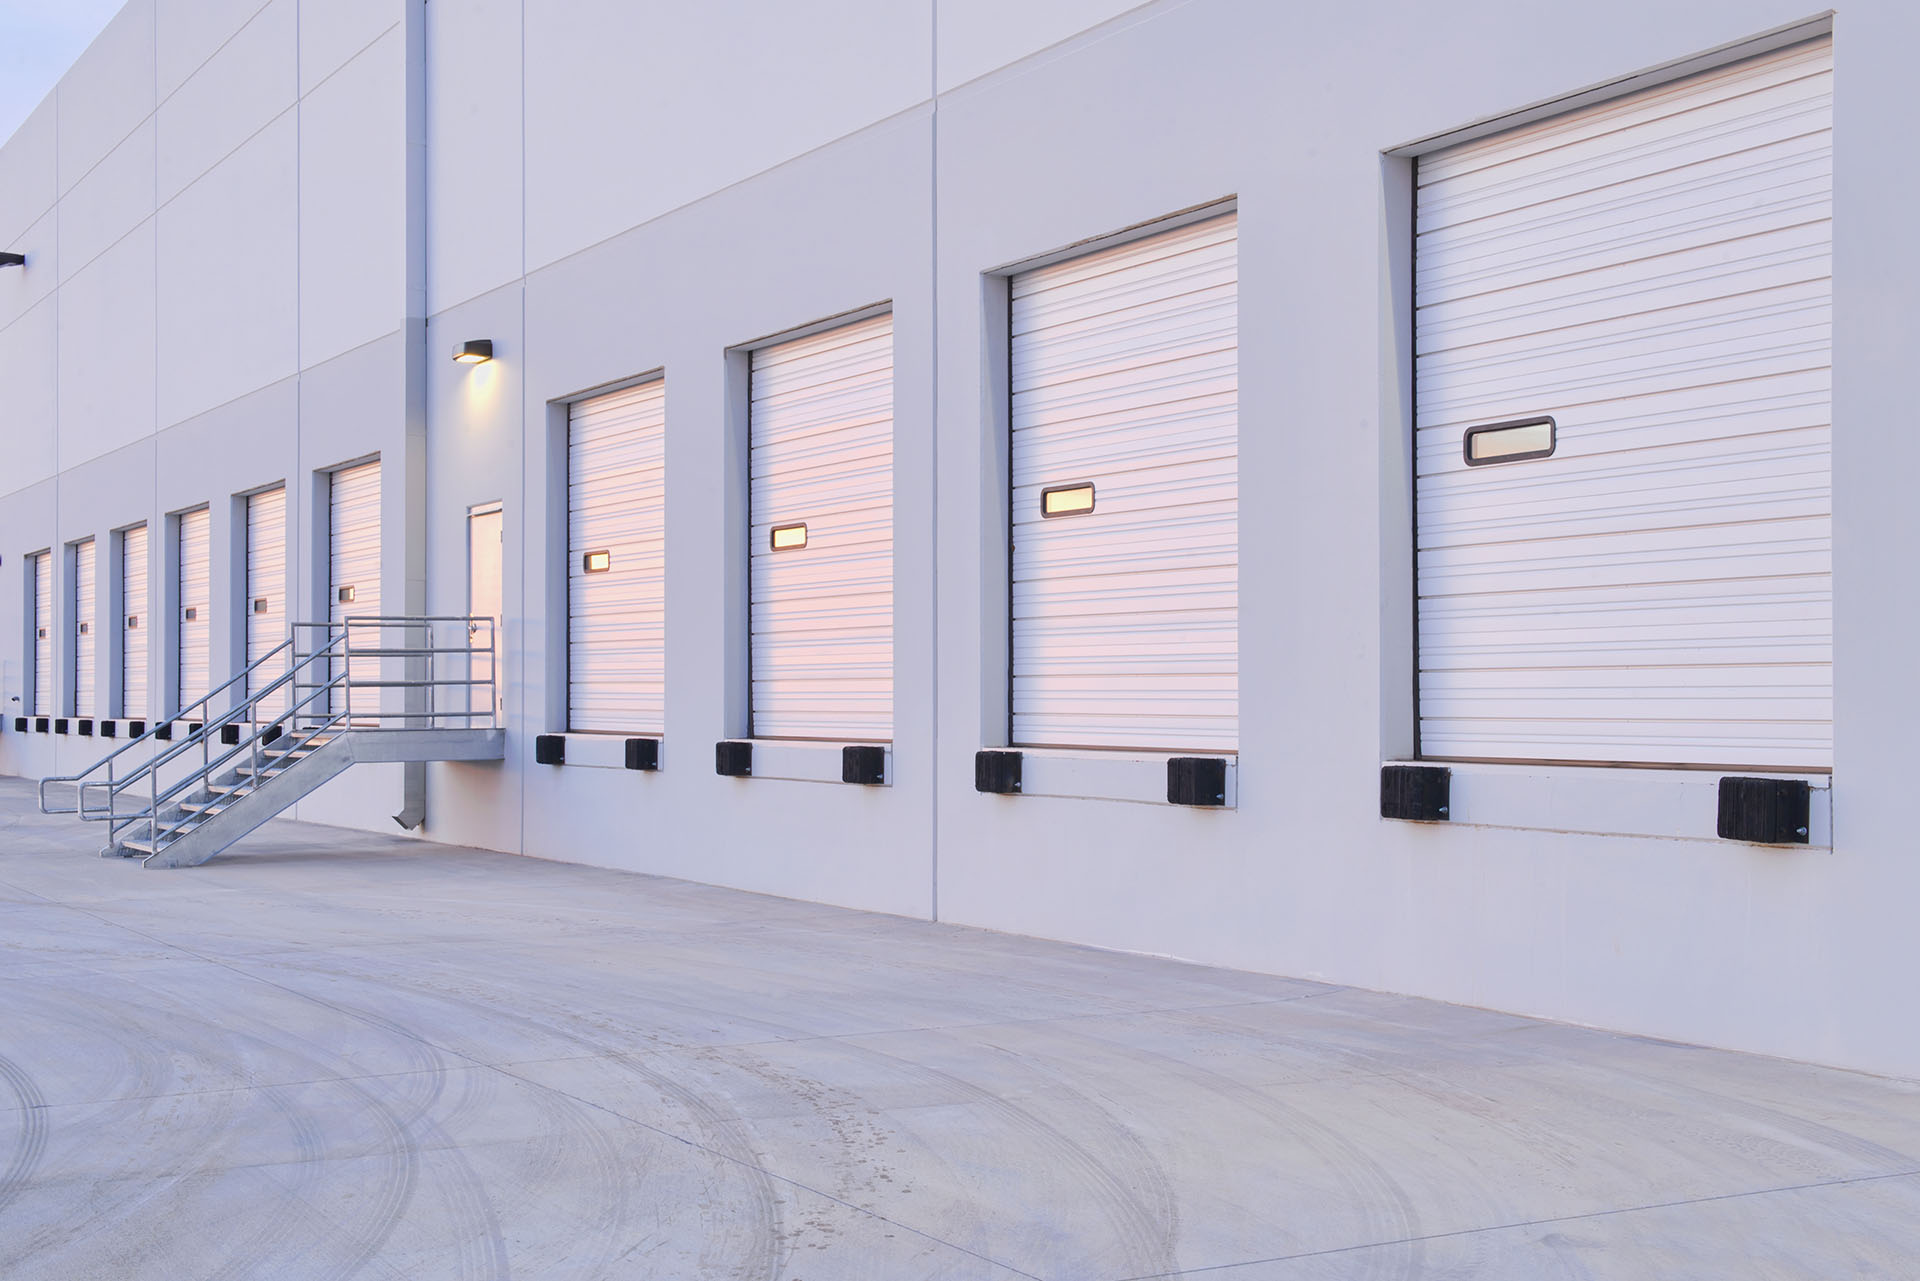 Sale, repair and installation of commercial and industrial garage doors in Montreal, Laval and on the North Shore - Montreal Garage Doors - Portes de Garage Supérieur Inc. Montreal